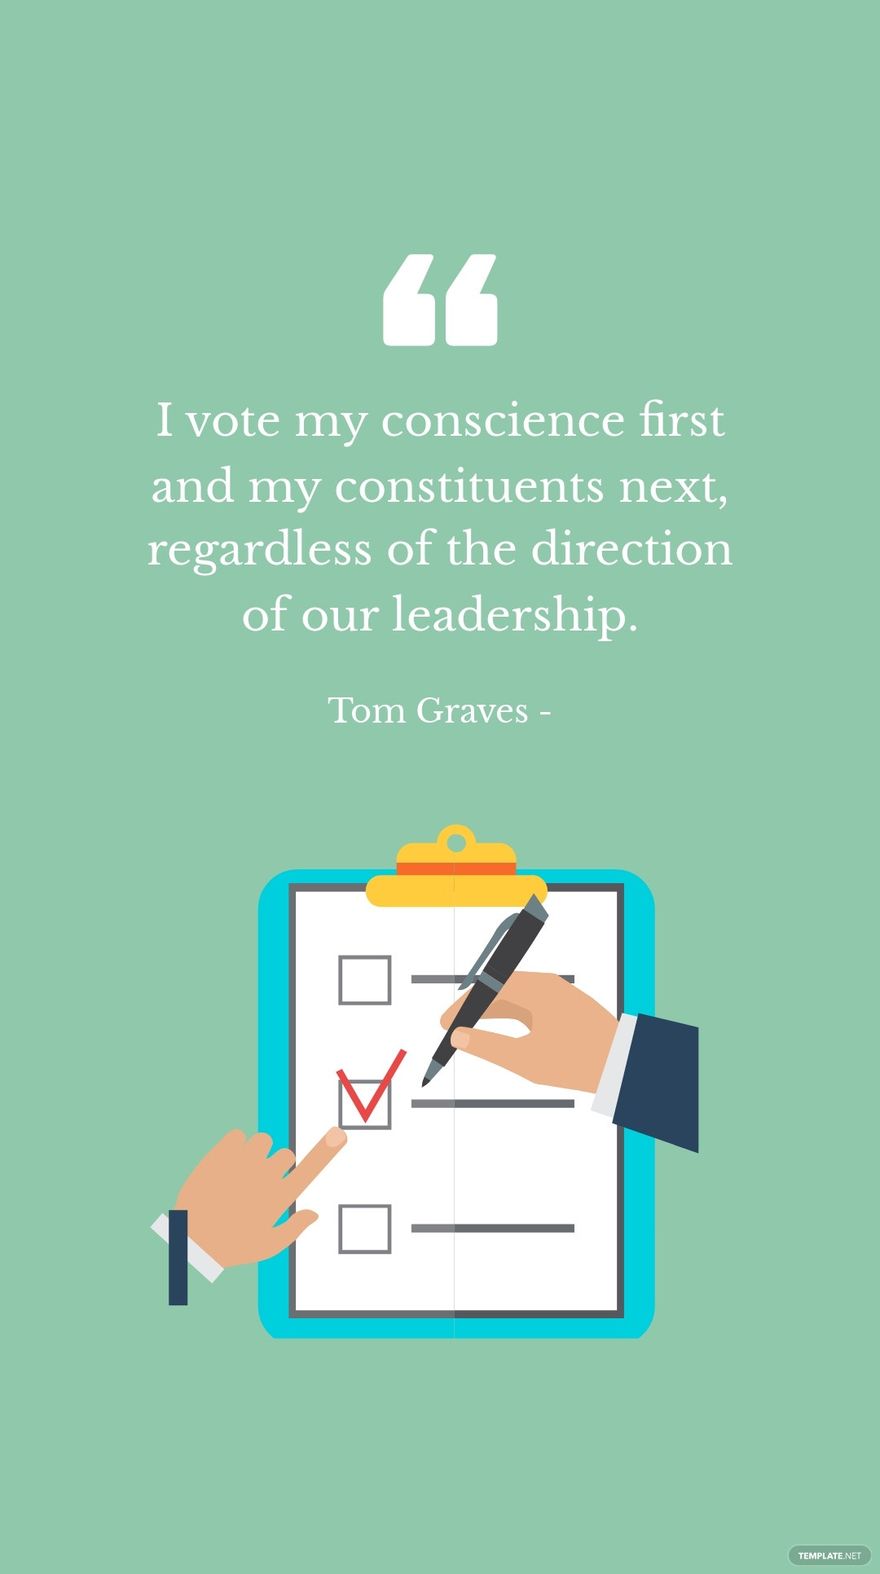 Tom Graves - I vote my conscience first and my constituents next, regardless of the direction of our leadership.